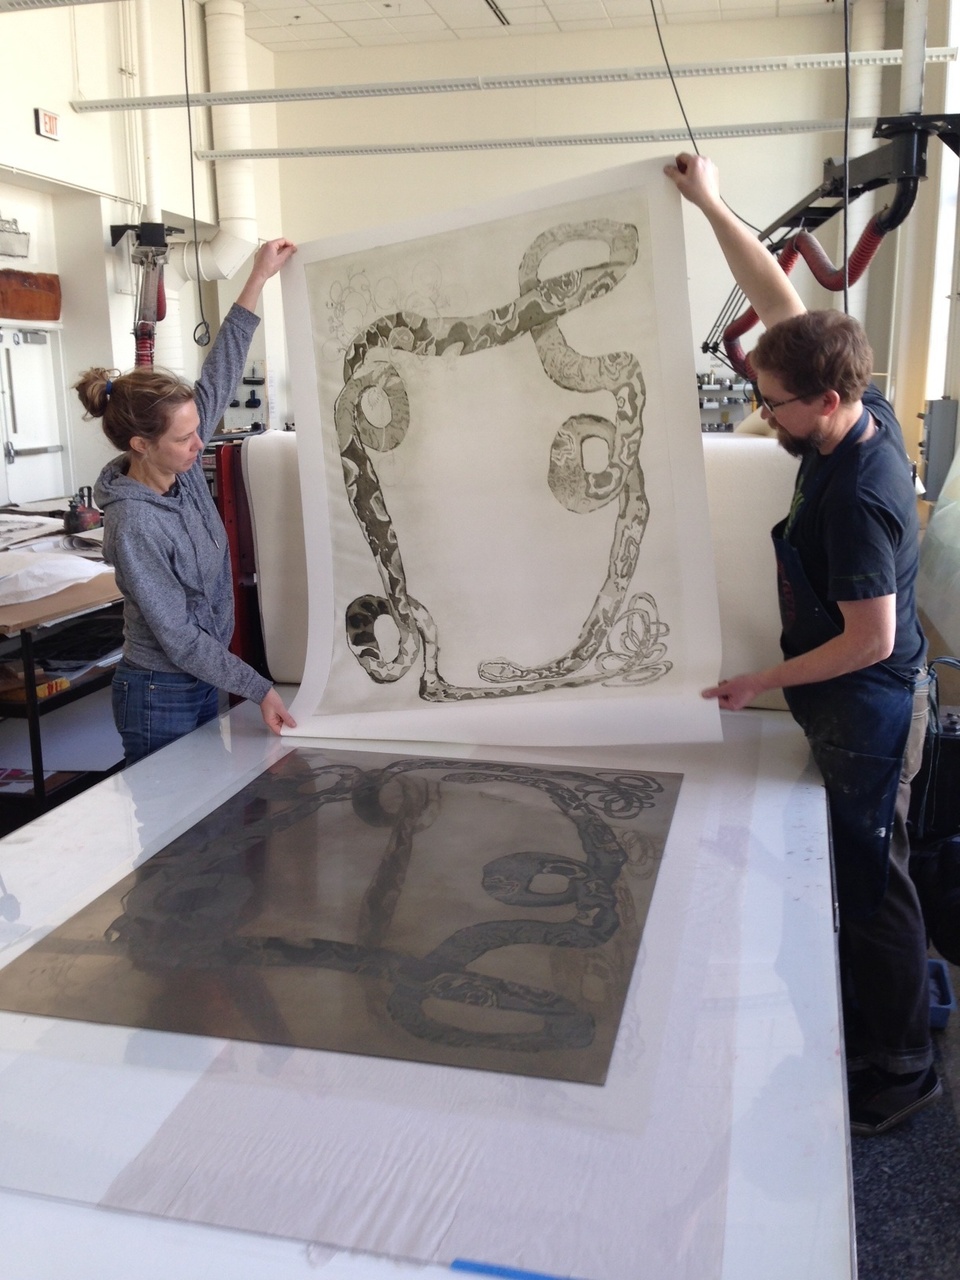 artist and printer at the press lifting proof of snake image from the plate